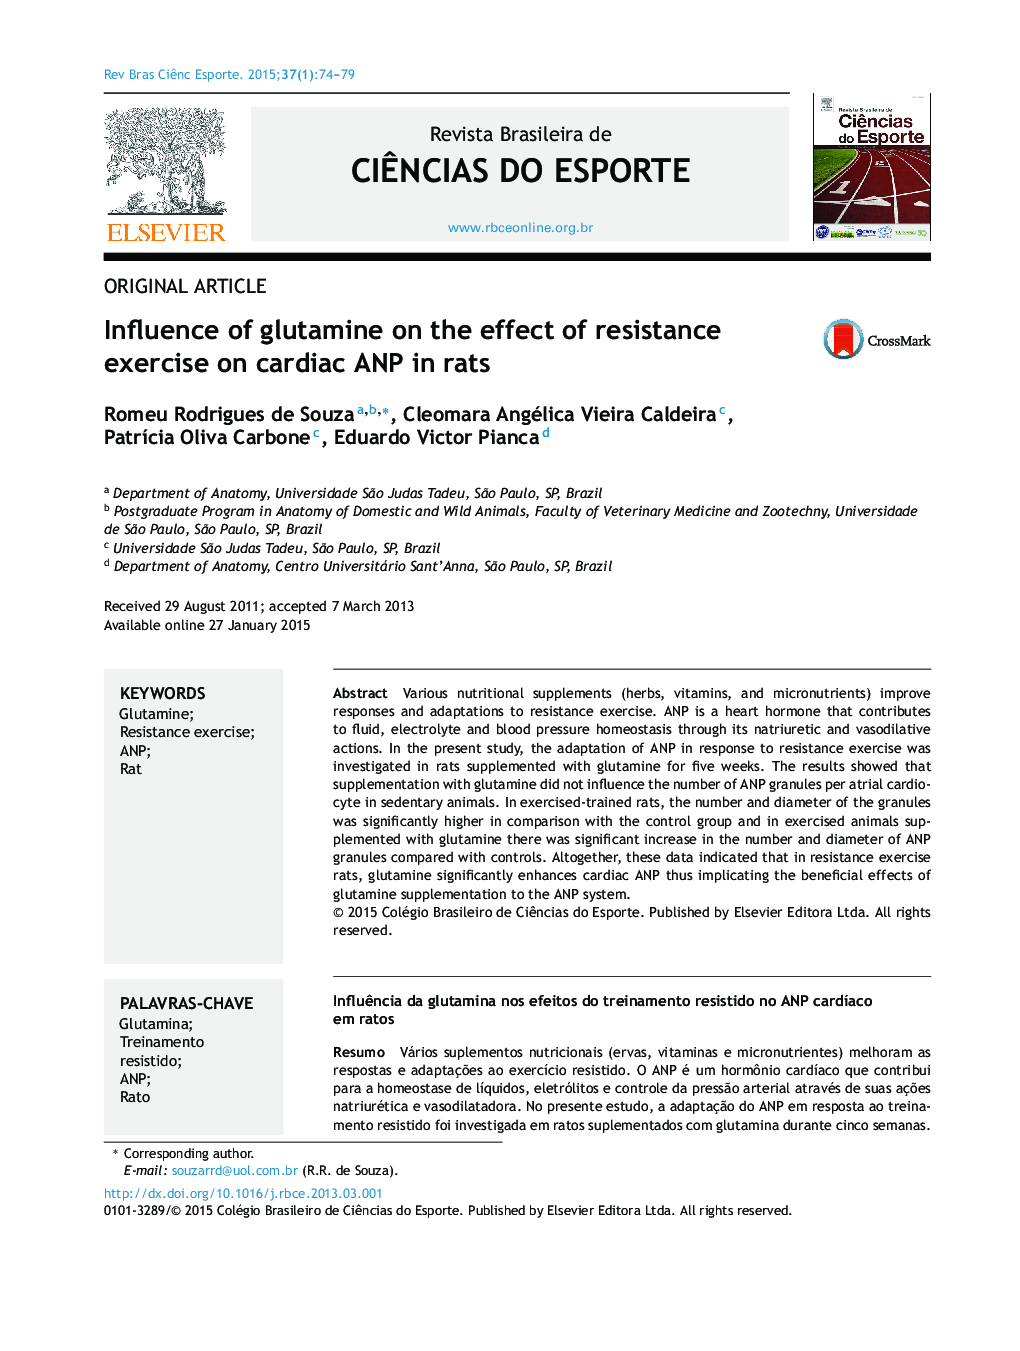 Influence of glutamine on the effect of resistance exercise on cardiac ANP in rats